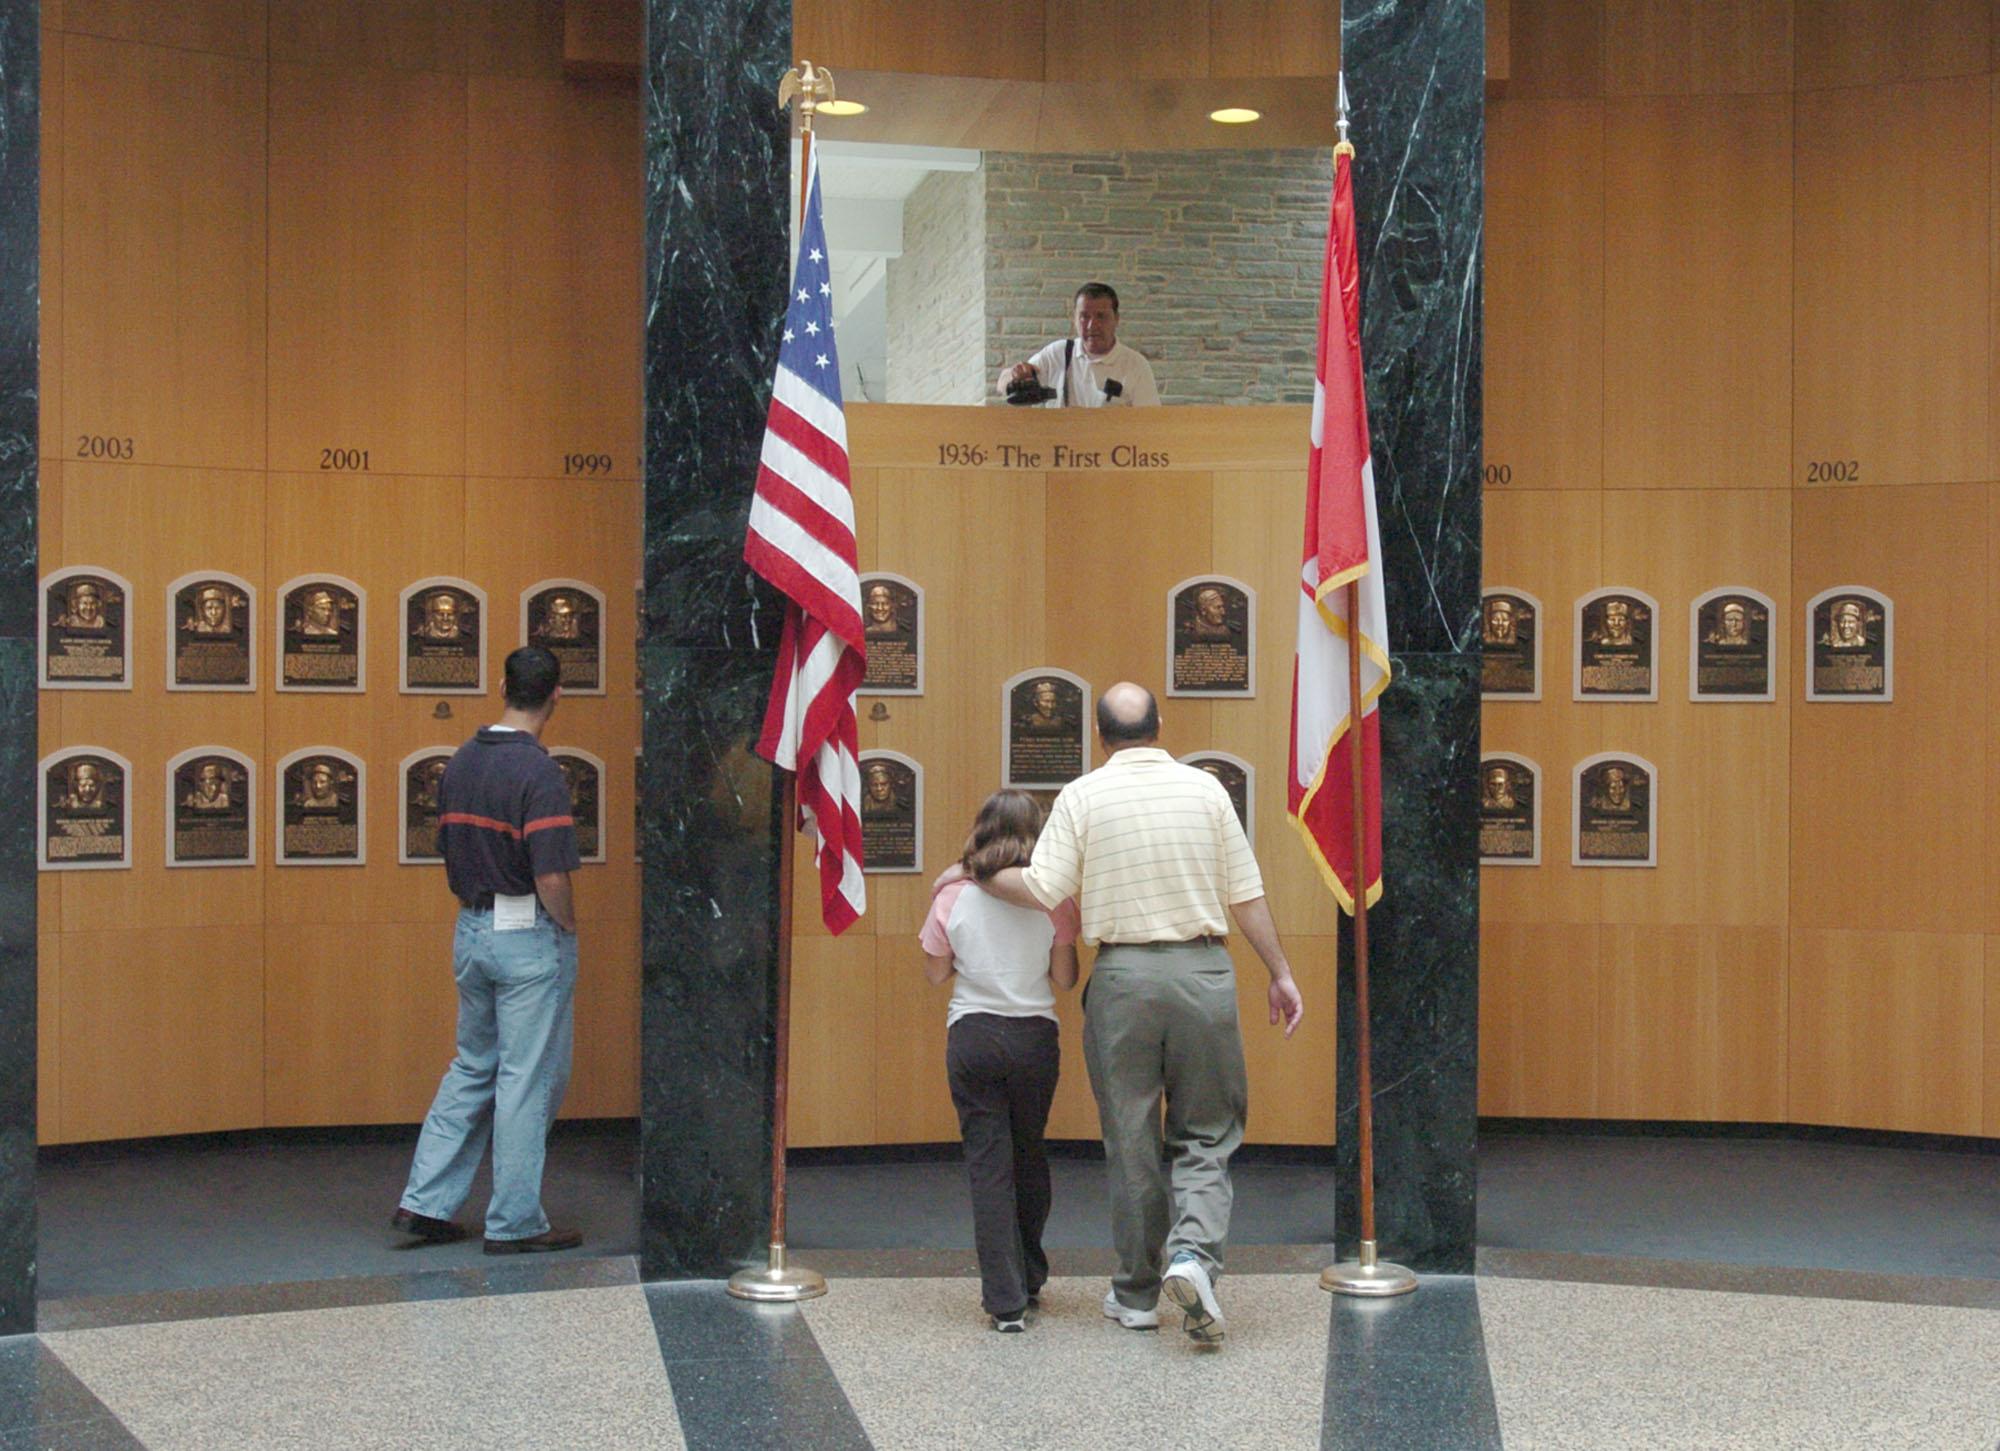 File:Gehrig Robinson Clemente exhibit at Baseball Hall of Fame